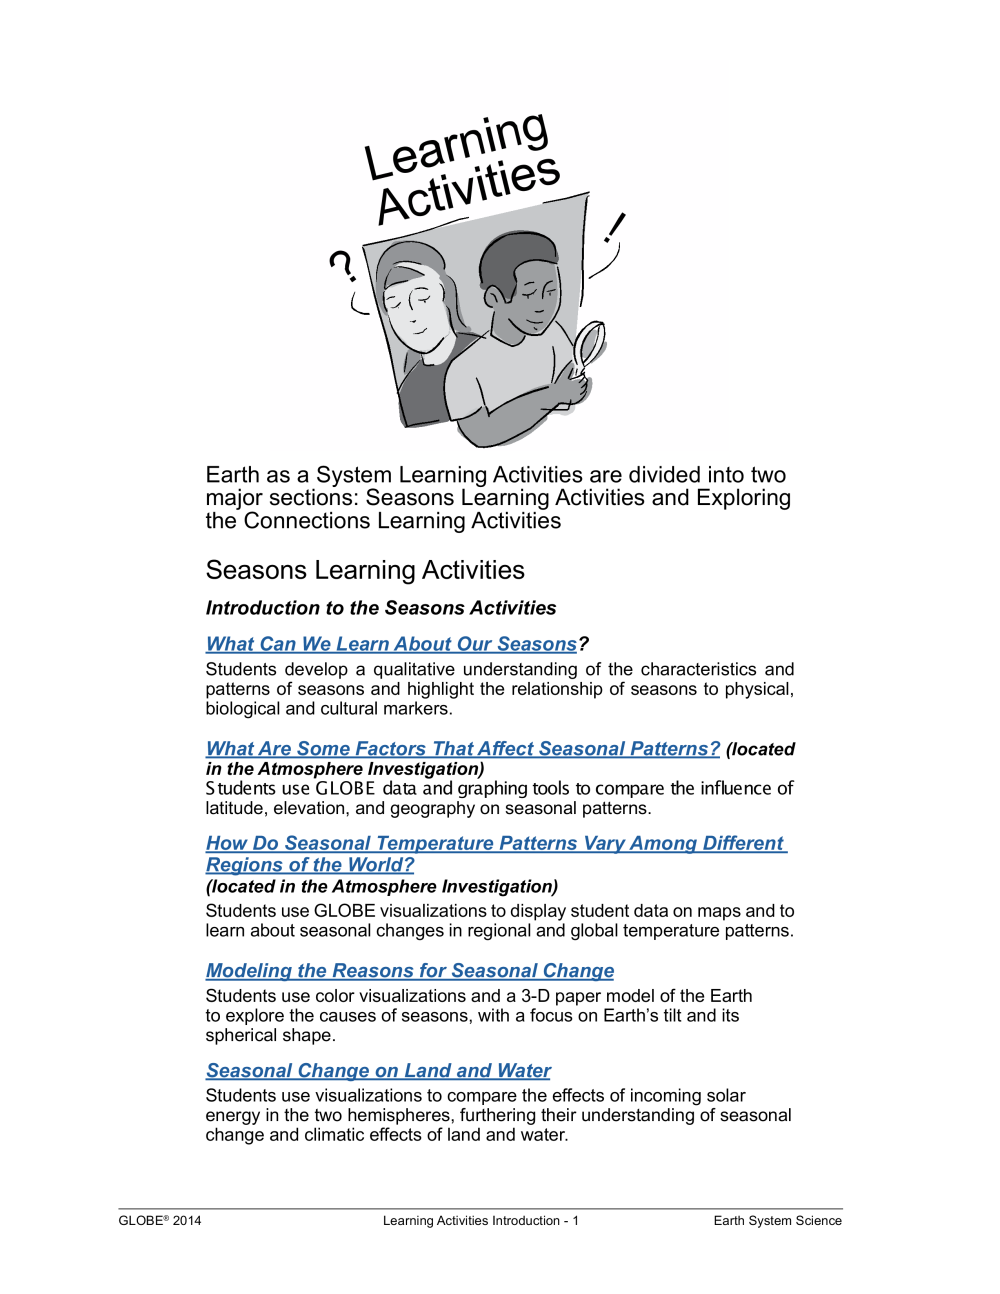 Learning Activities preview for Earth as a system Learning Activities - Summary